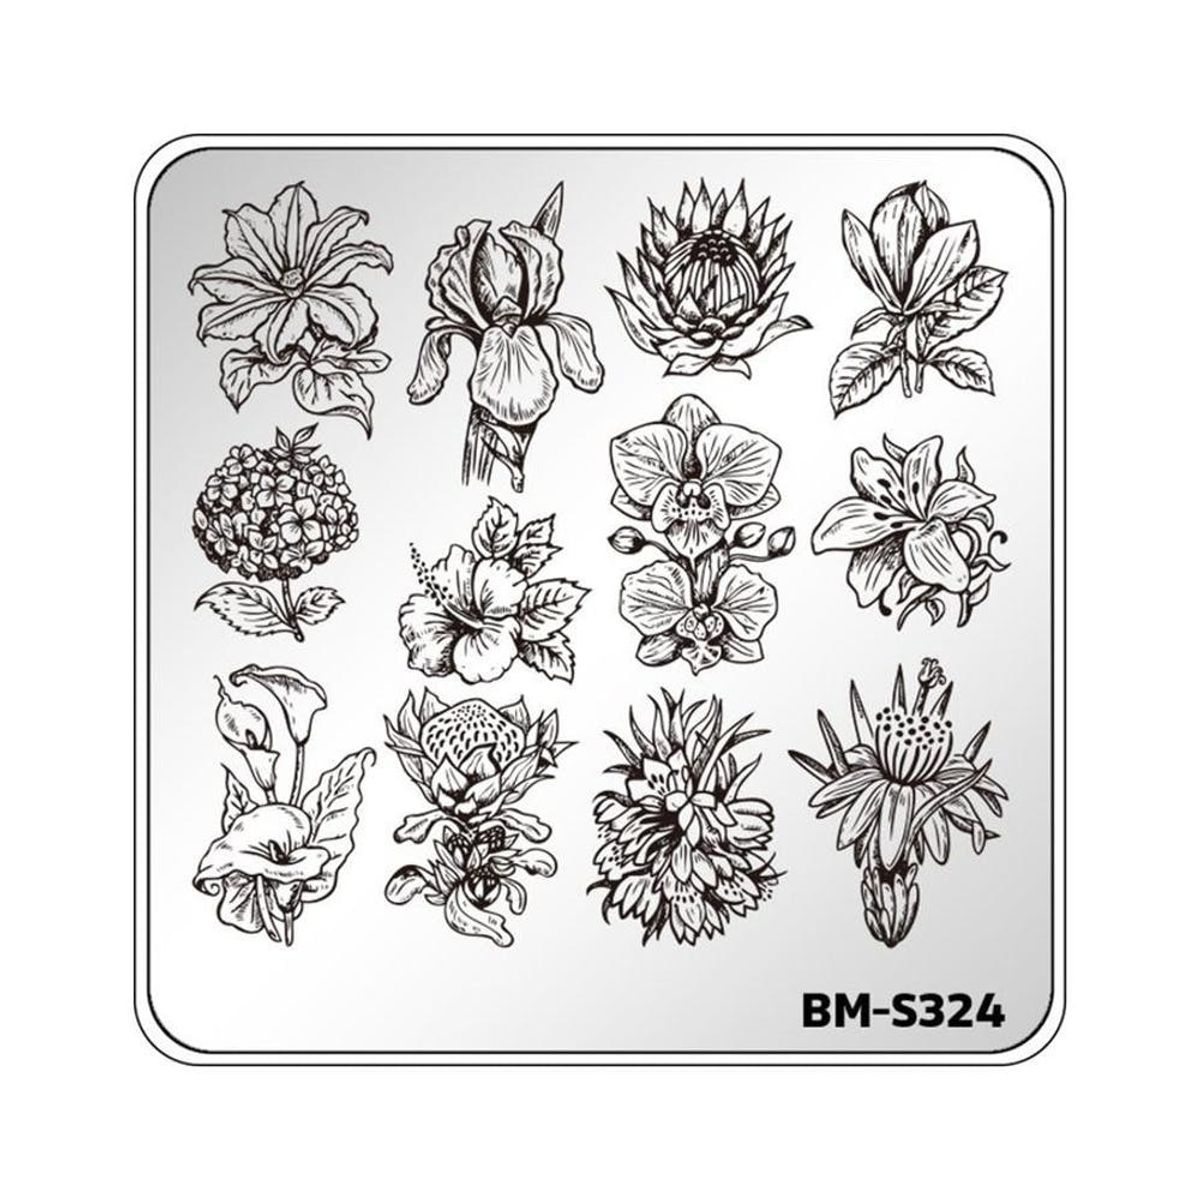 Reusable Stamping Plates Are the Secret Behind Those Unbelievably Intricate Nail Art Designs